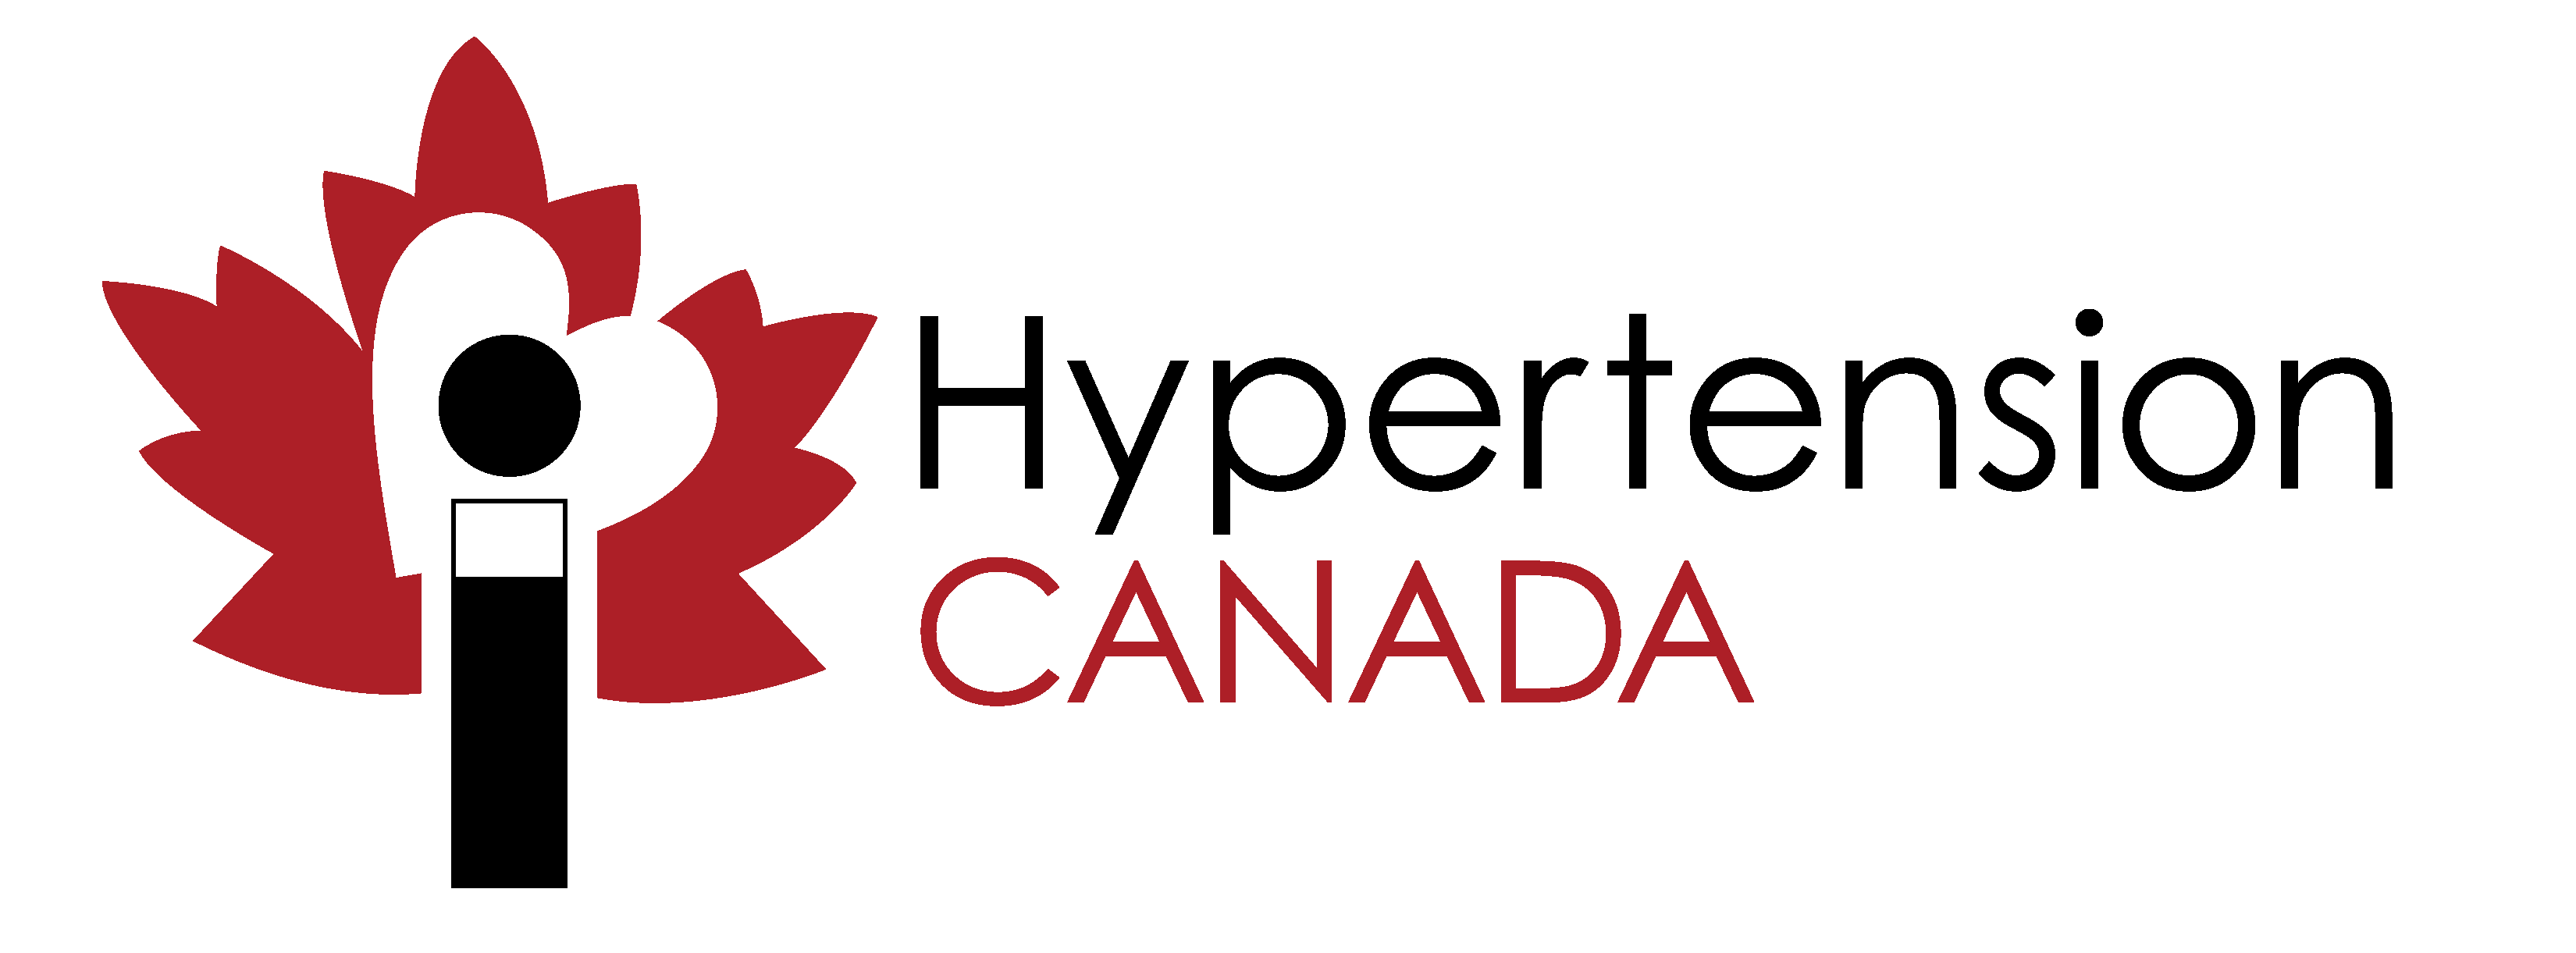 Logo of hypertension canada featuring a red maple leaf with a white abstract figure and microphone, next to the text "hypertension canada" in black.